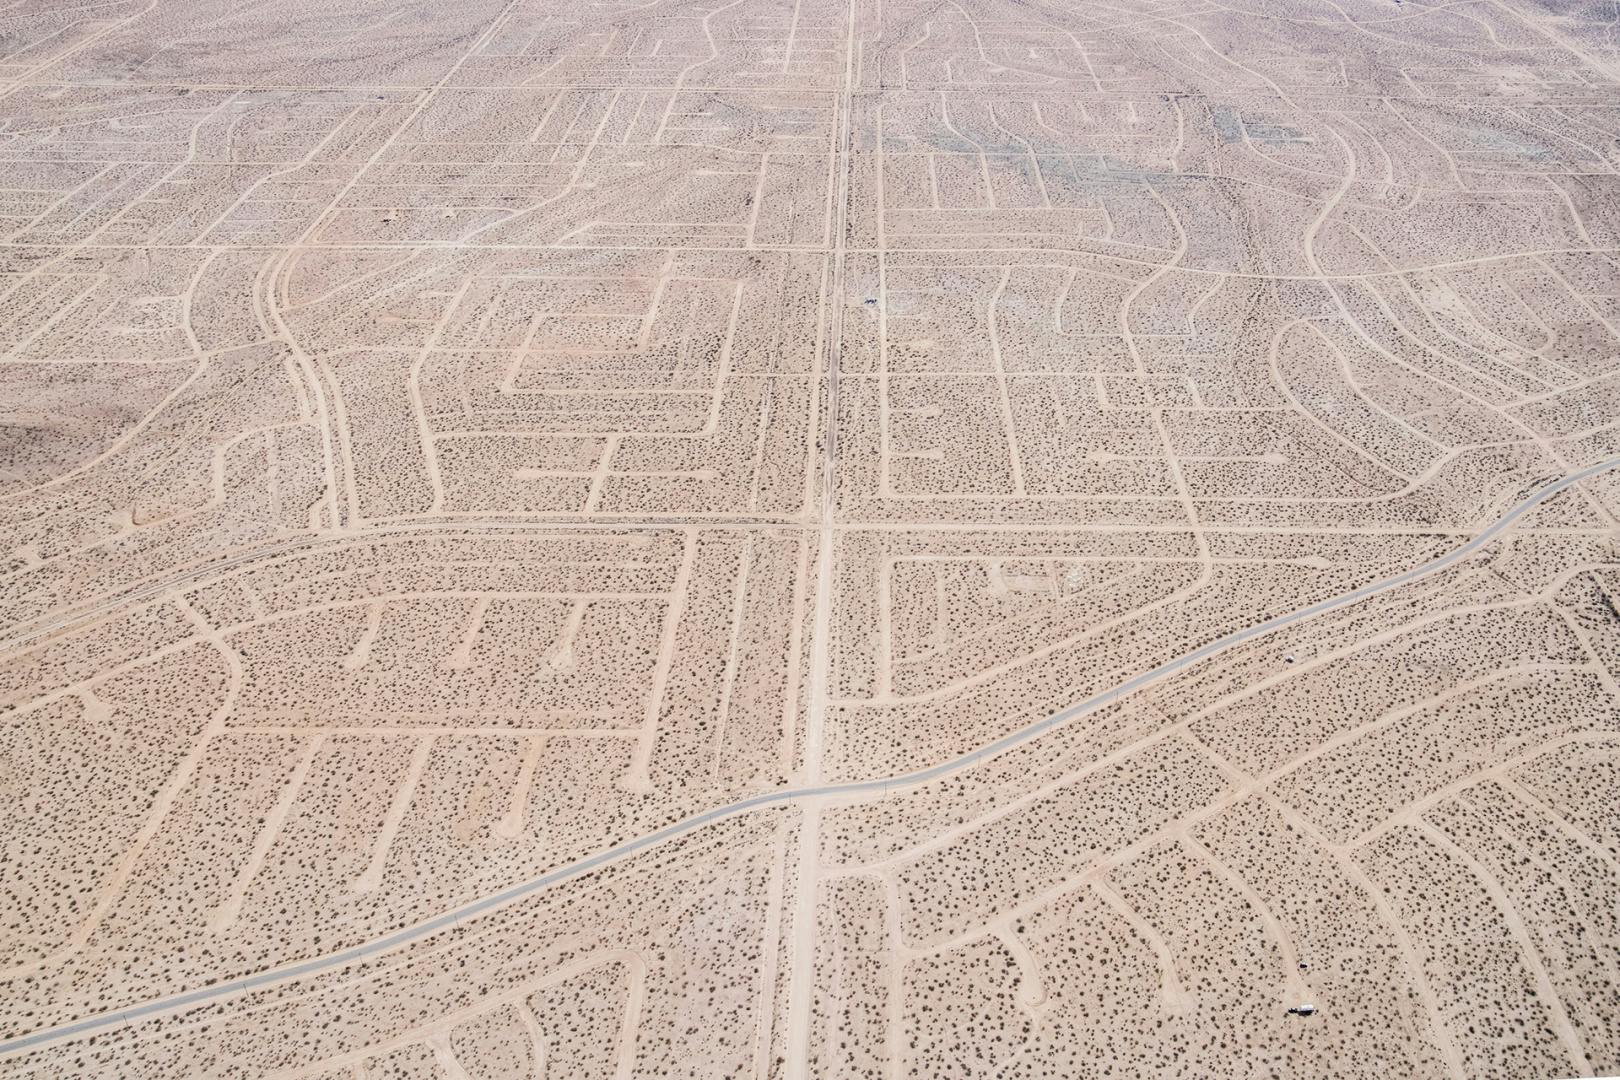 Aerial photo from American Glitch by Andrea Orejarena and Caleb Stein showing a network of roads in the Californian desert